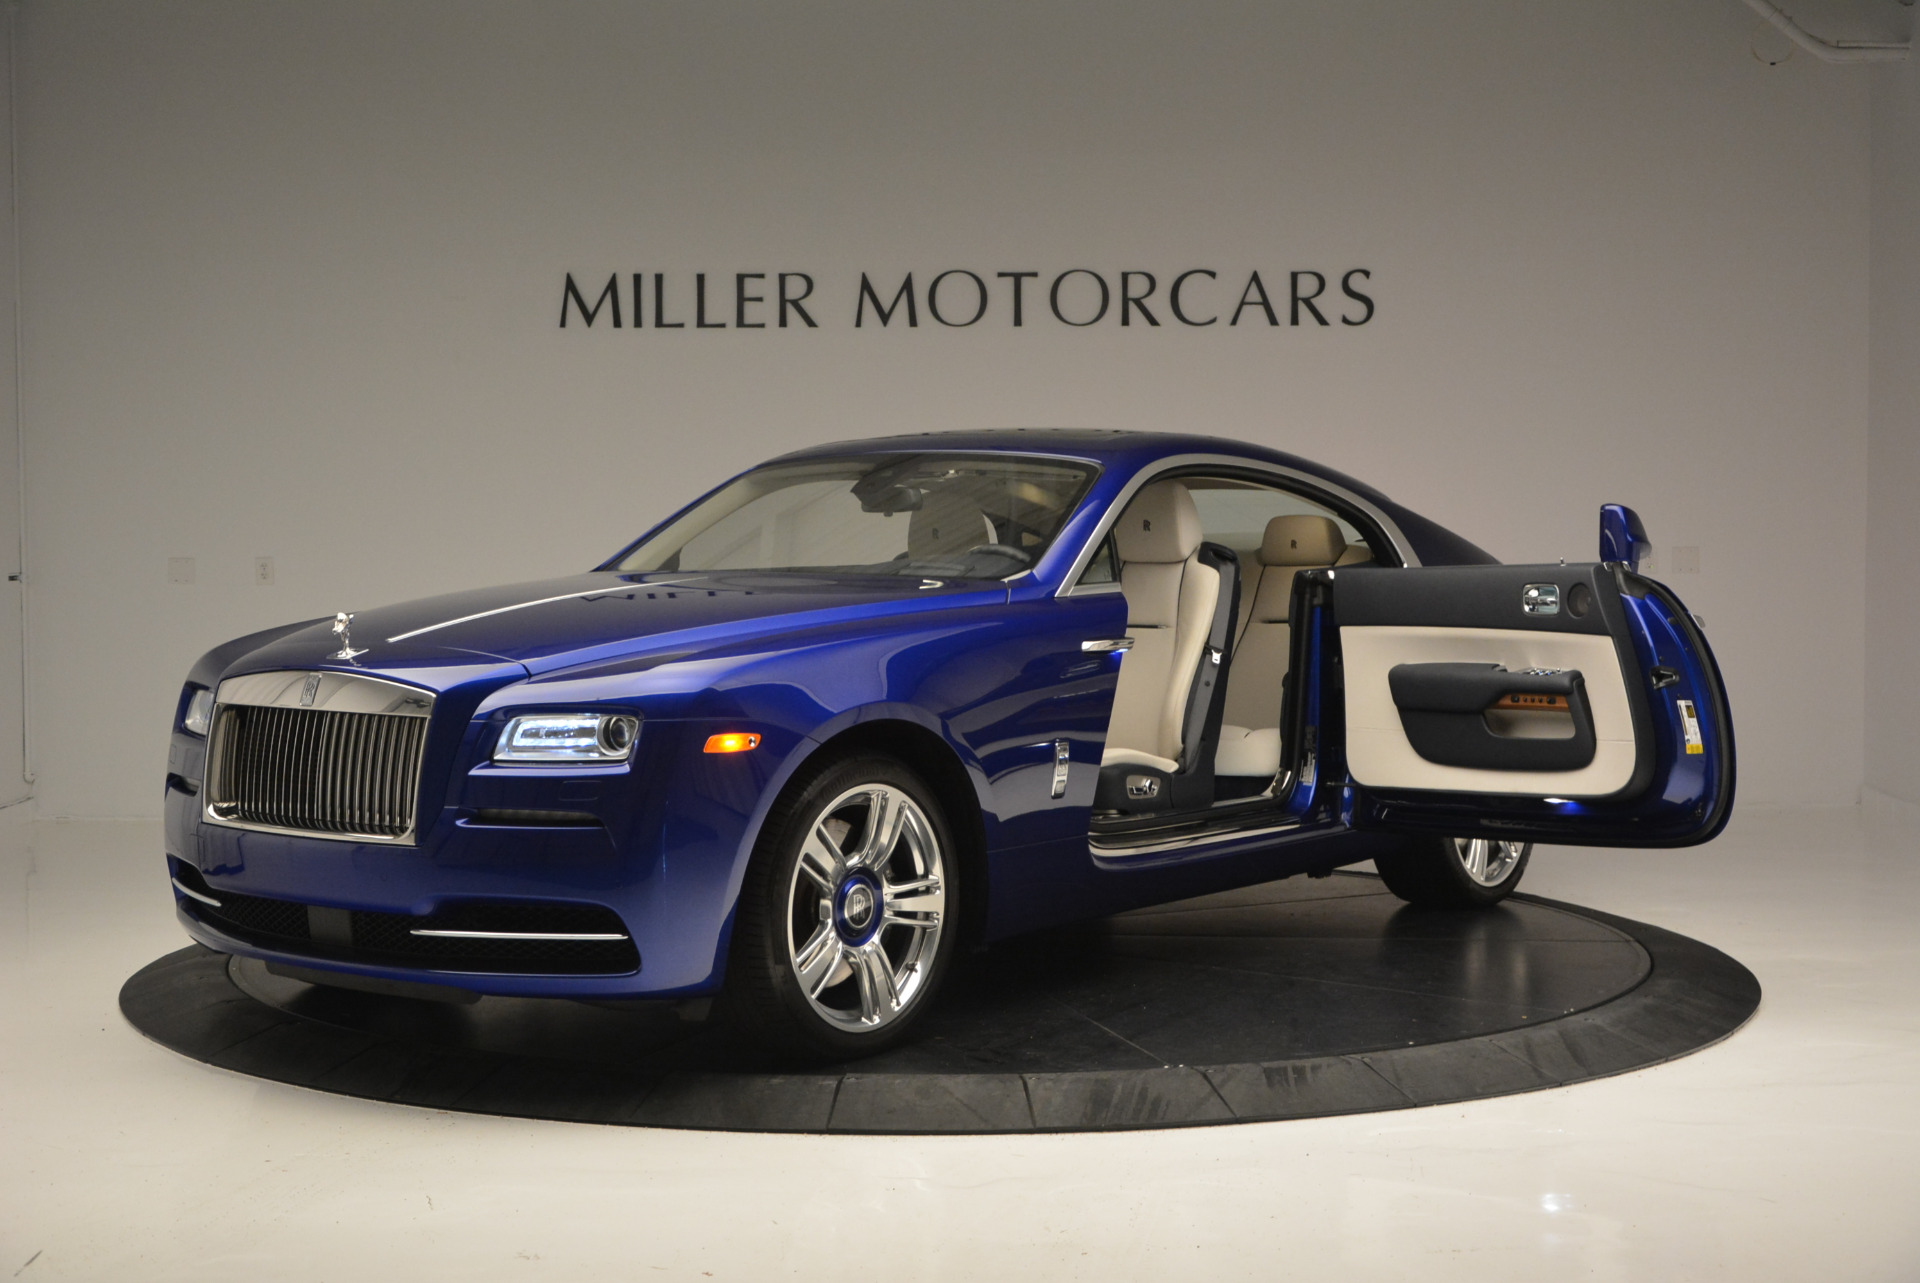 Royal blue Rolls Royce wraith convertible  Rolls royce Car wallpapers  Cool cars